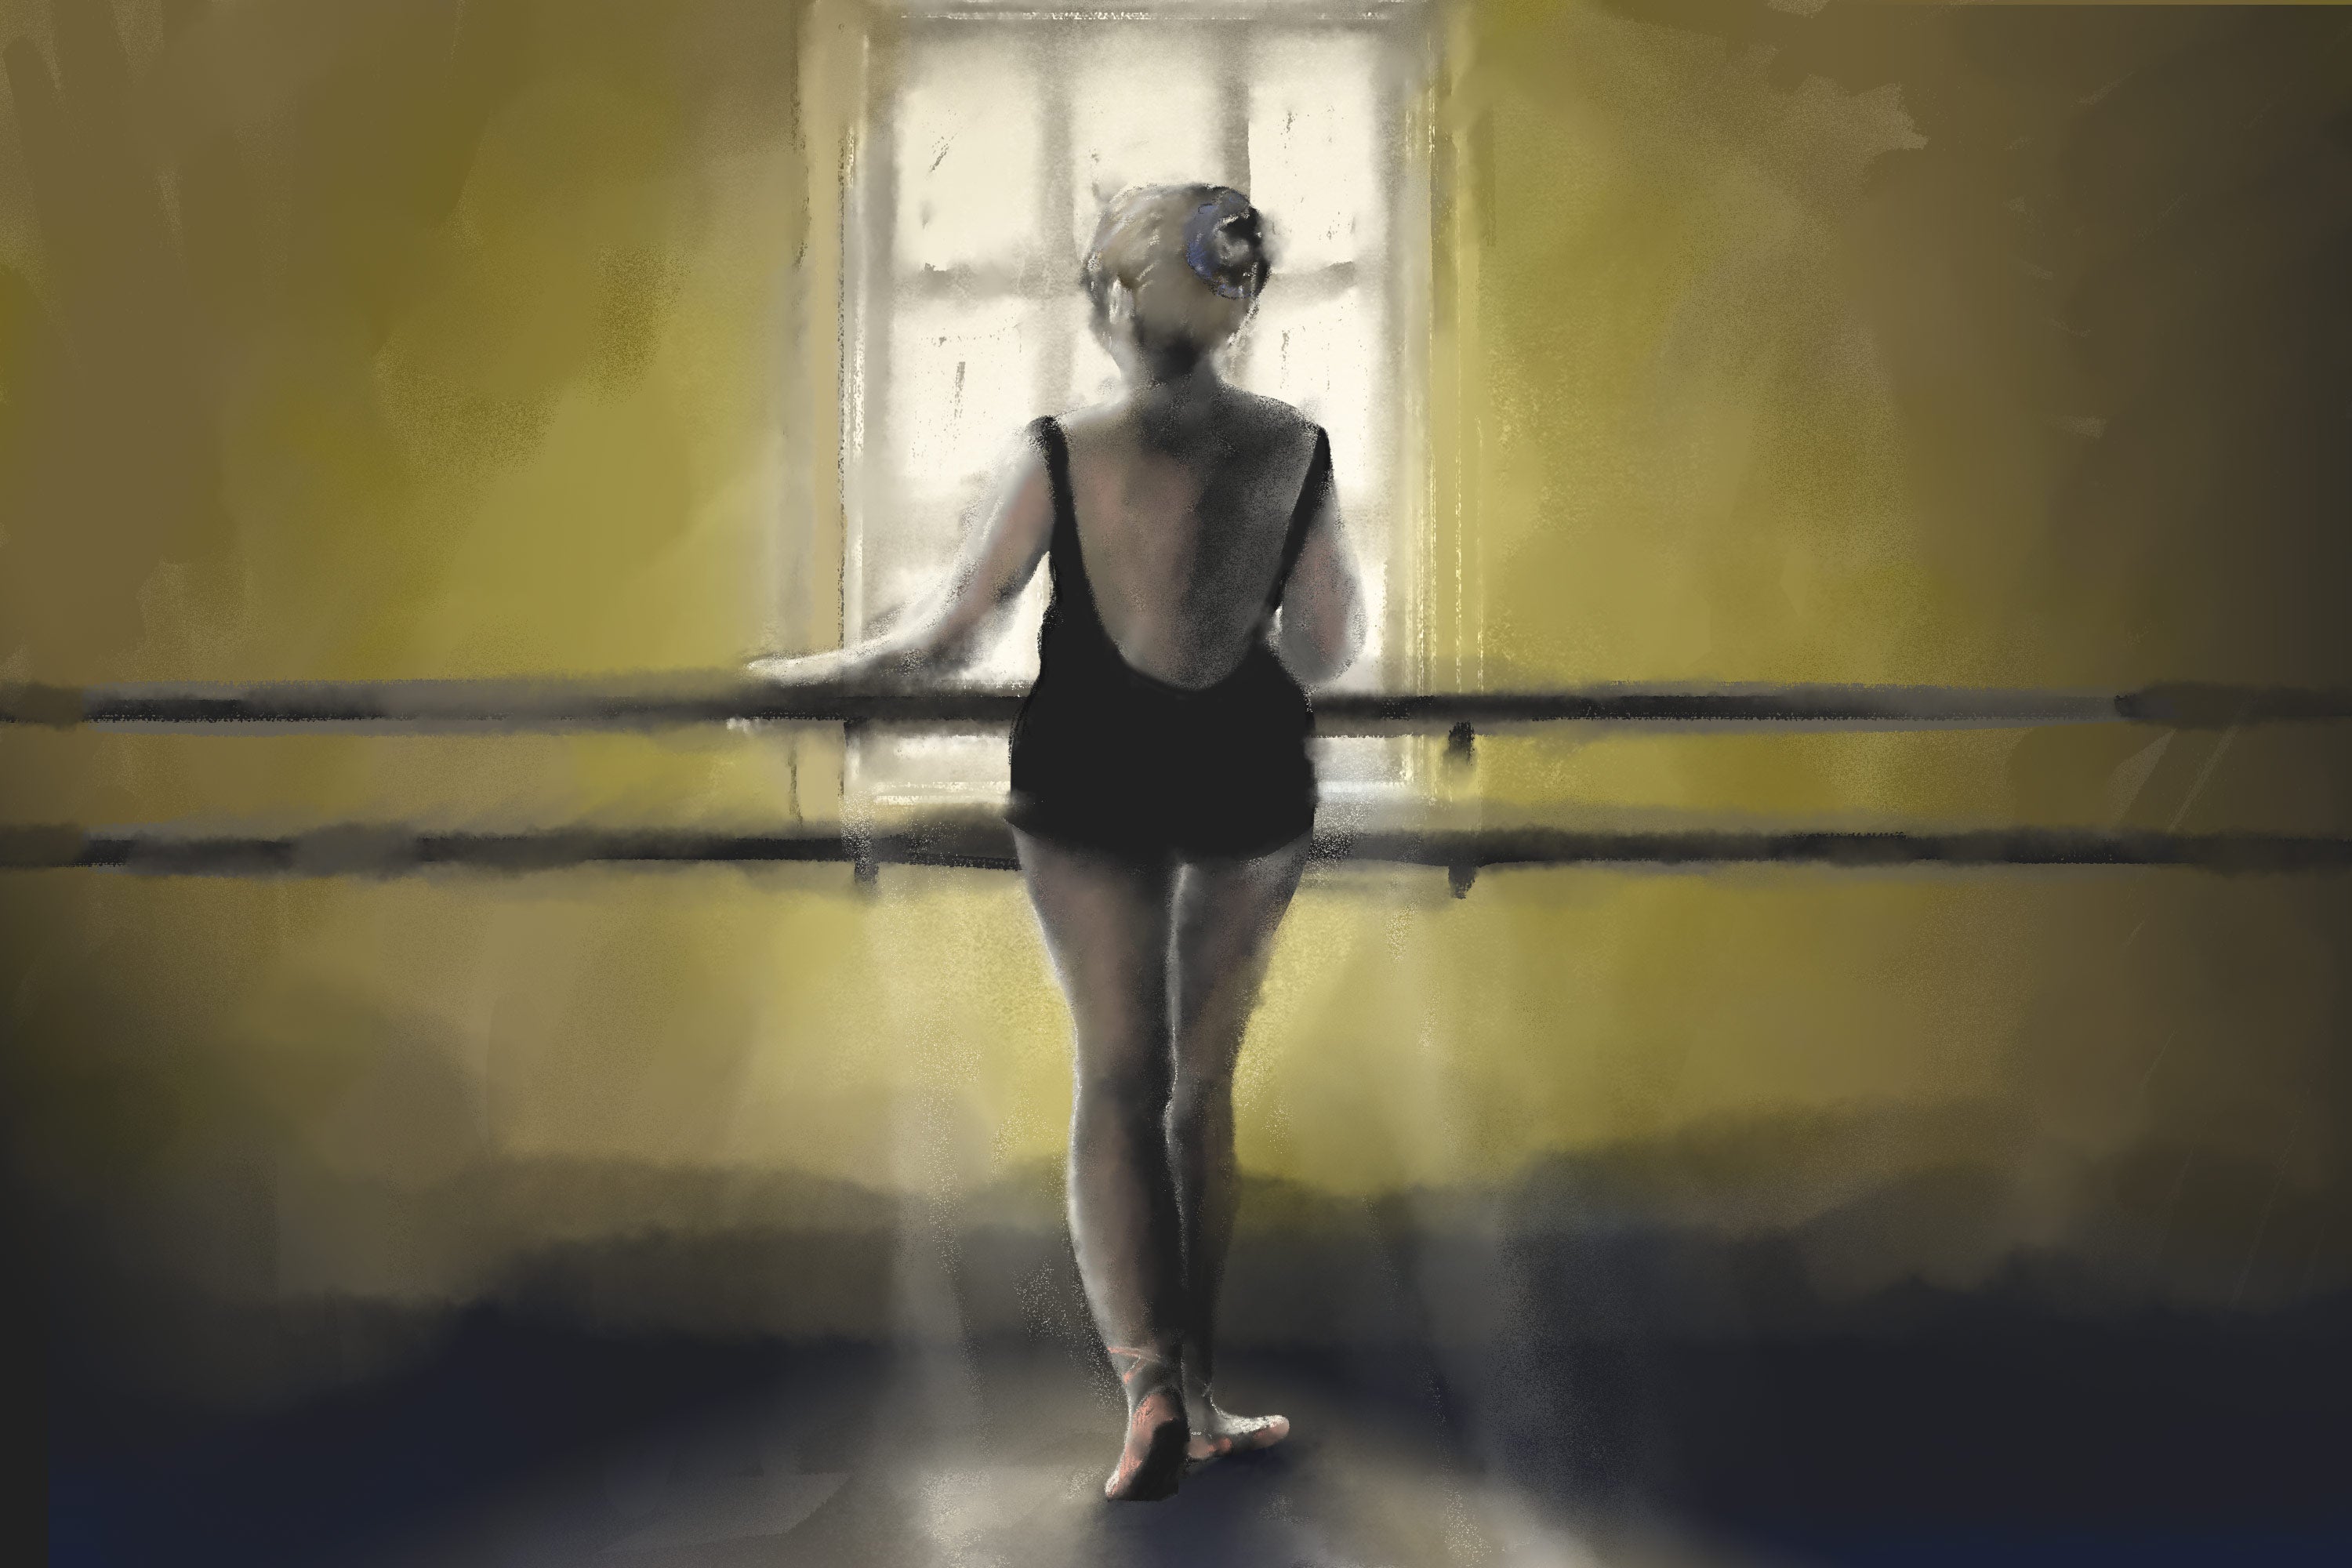 Personal essay about starting ballet classes over age